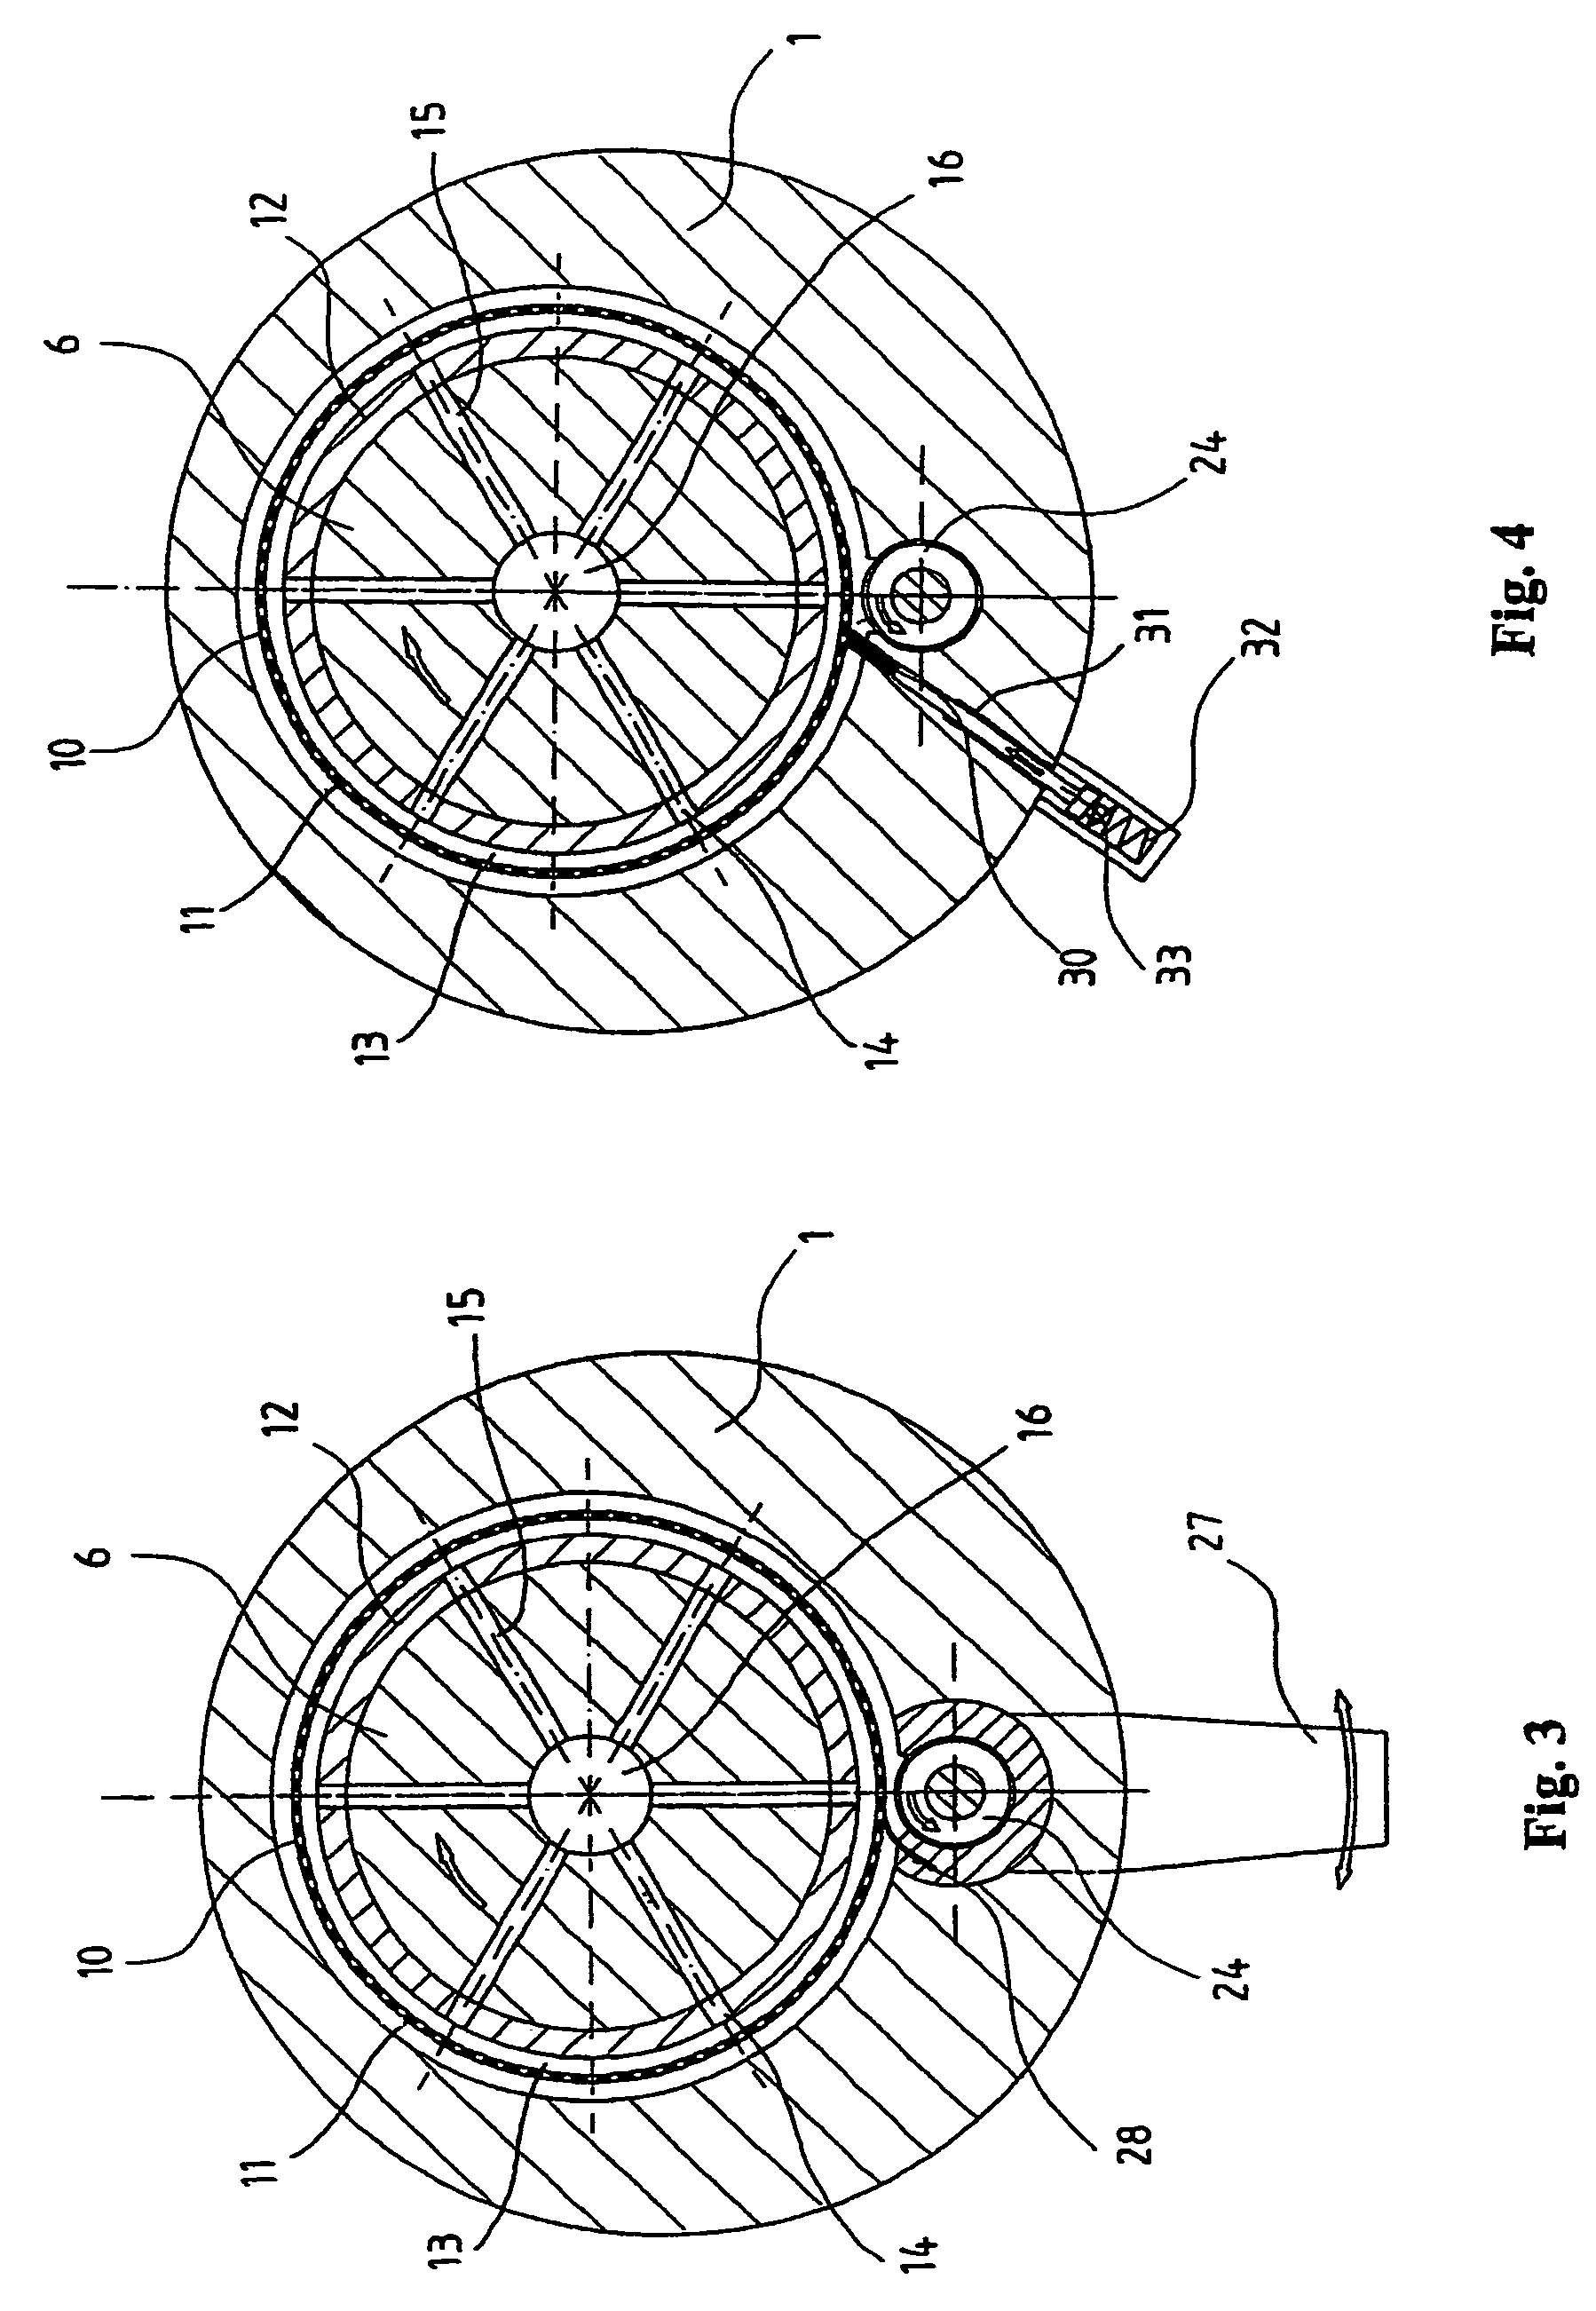 Device for continuous filtration of material blends